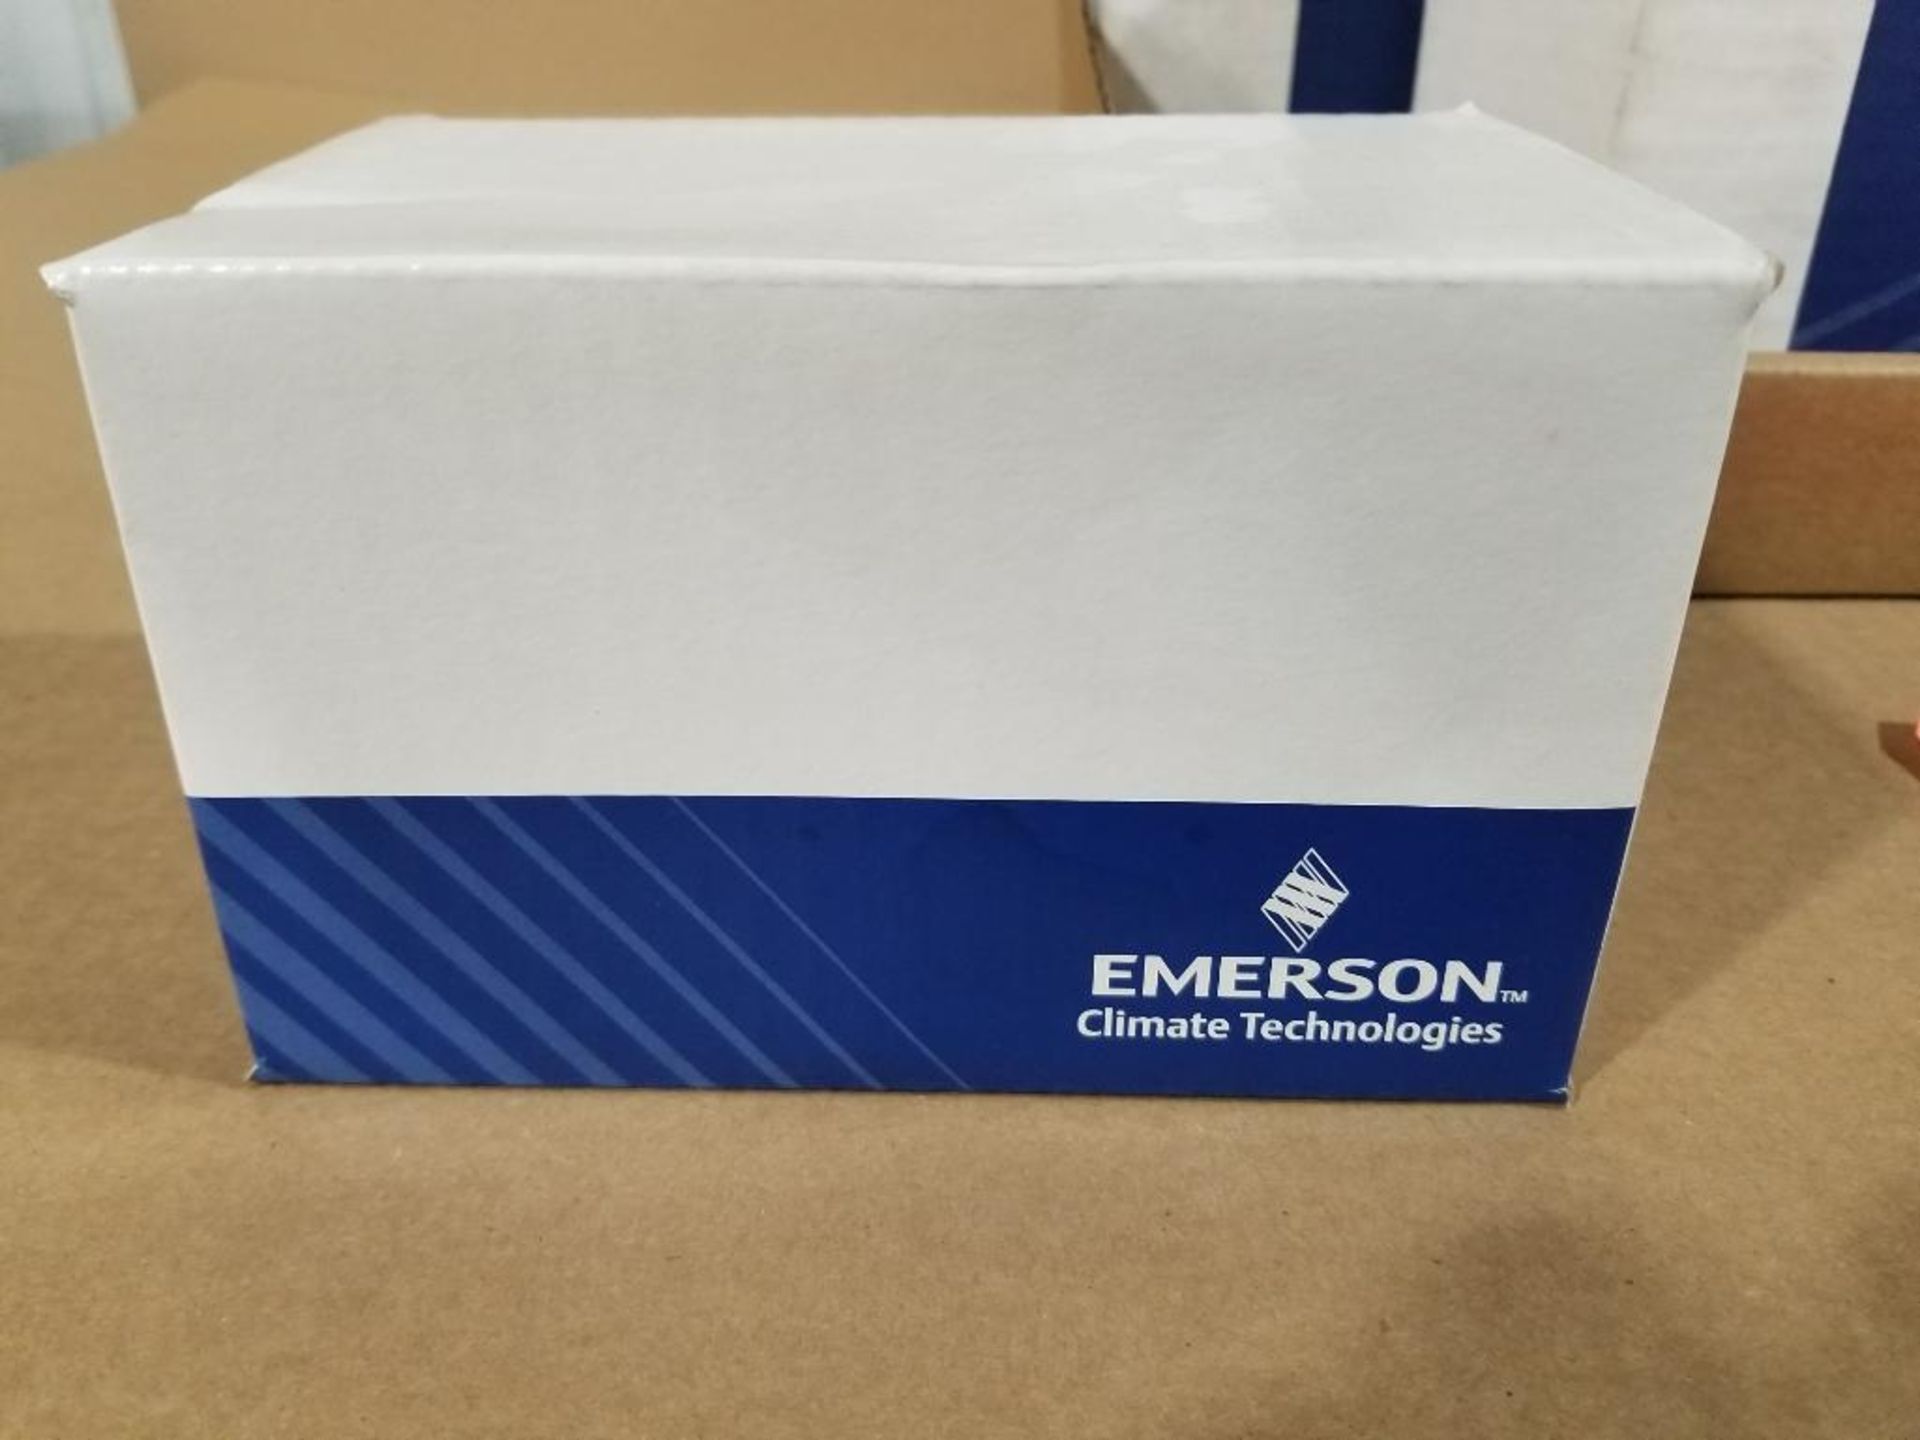 Qty 6 - Emerson thermal expansion valve. Part number HFESC-1/4-RW-45. - Image 2 of 4